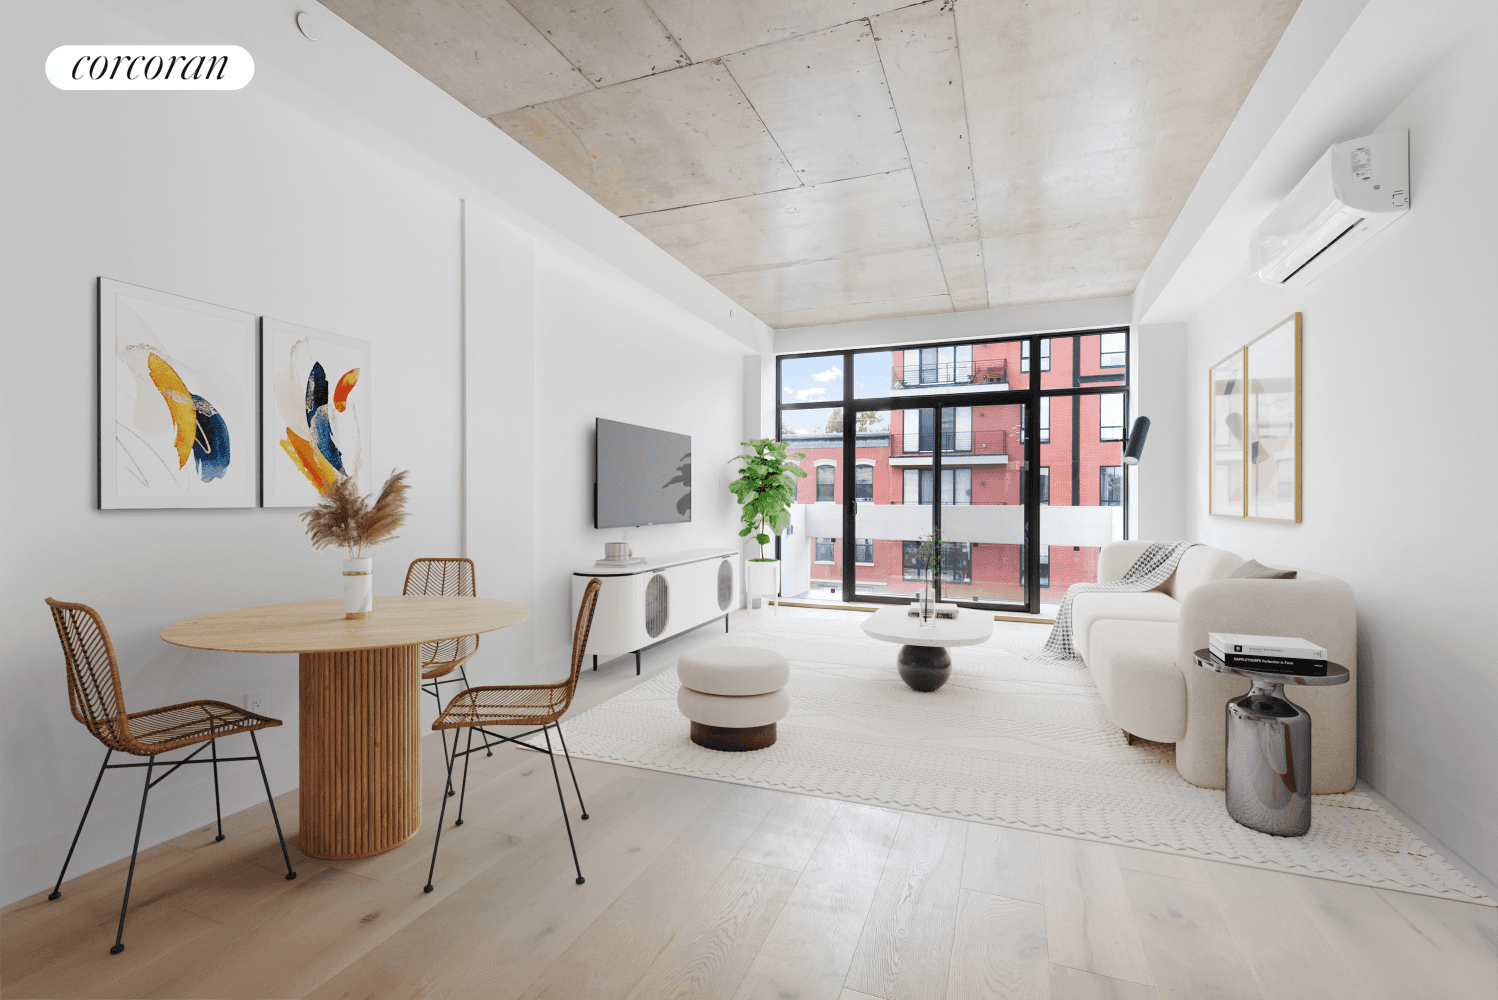 531 Classon Avenue is a brand new, 8 unit boutique new construction condo building offering the best of both worlds modern finishes and industrial vibes in a loft like setting.